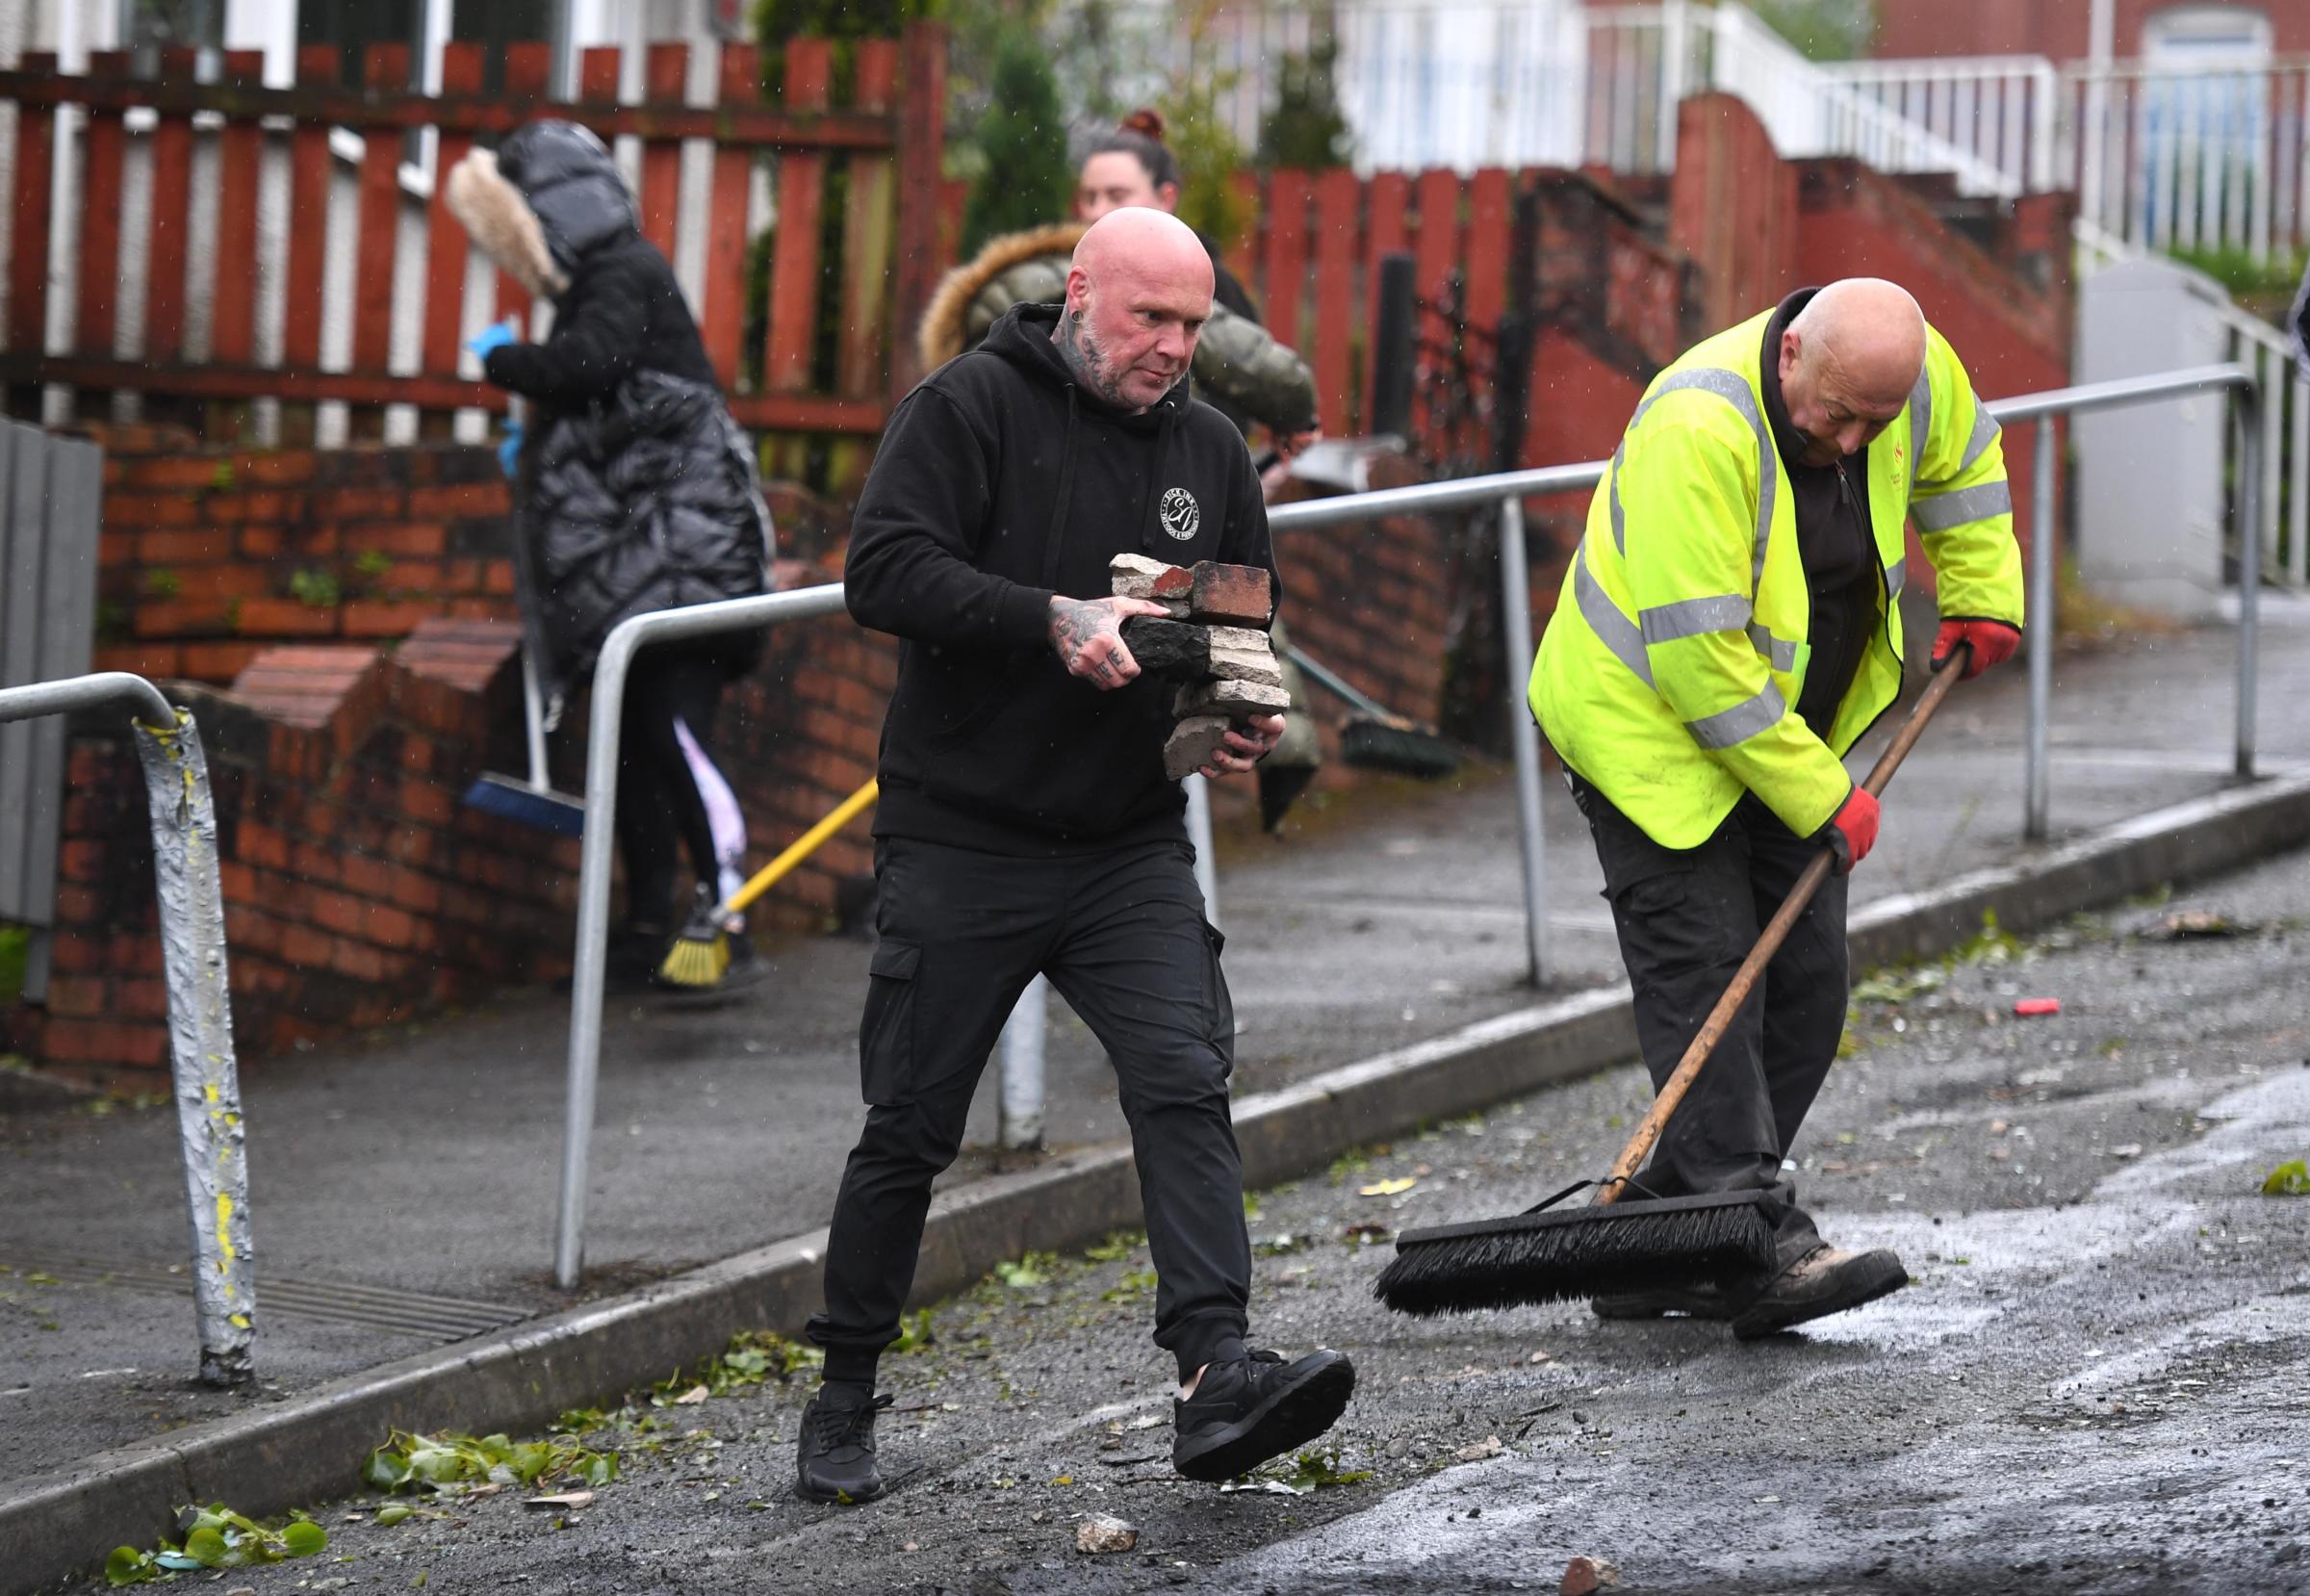 21.05.21 - Local residents and council workers clear up after cars were burnt out and windows smashed during the violence and riots in the Mayhill area of Swansea, South Wales last night. Pictures: Huw Evans Agency